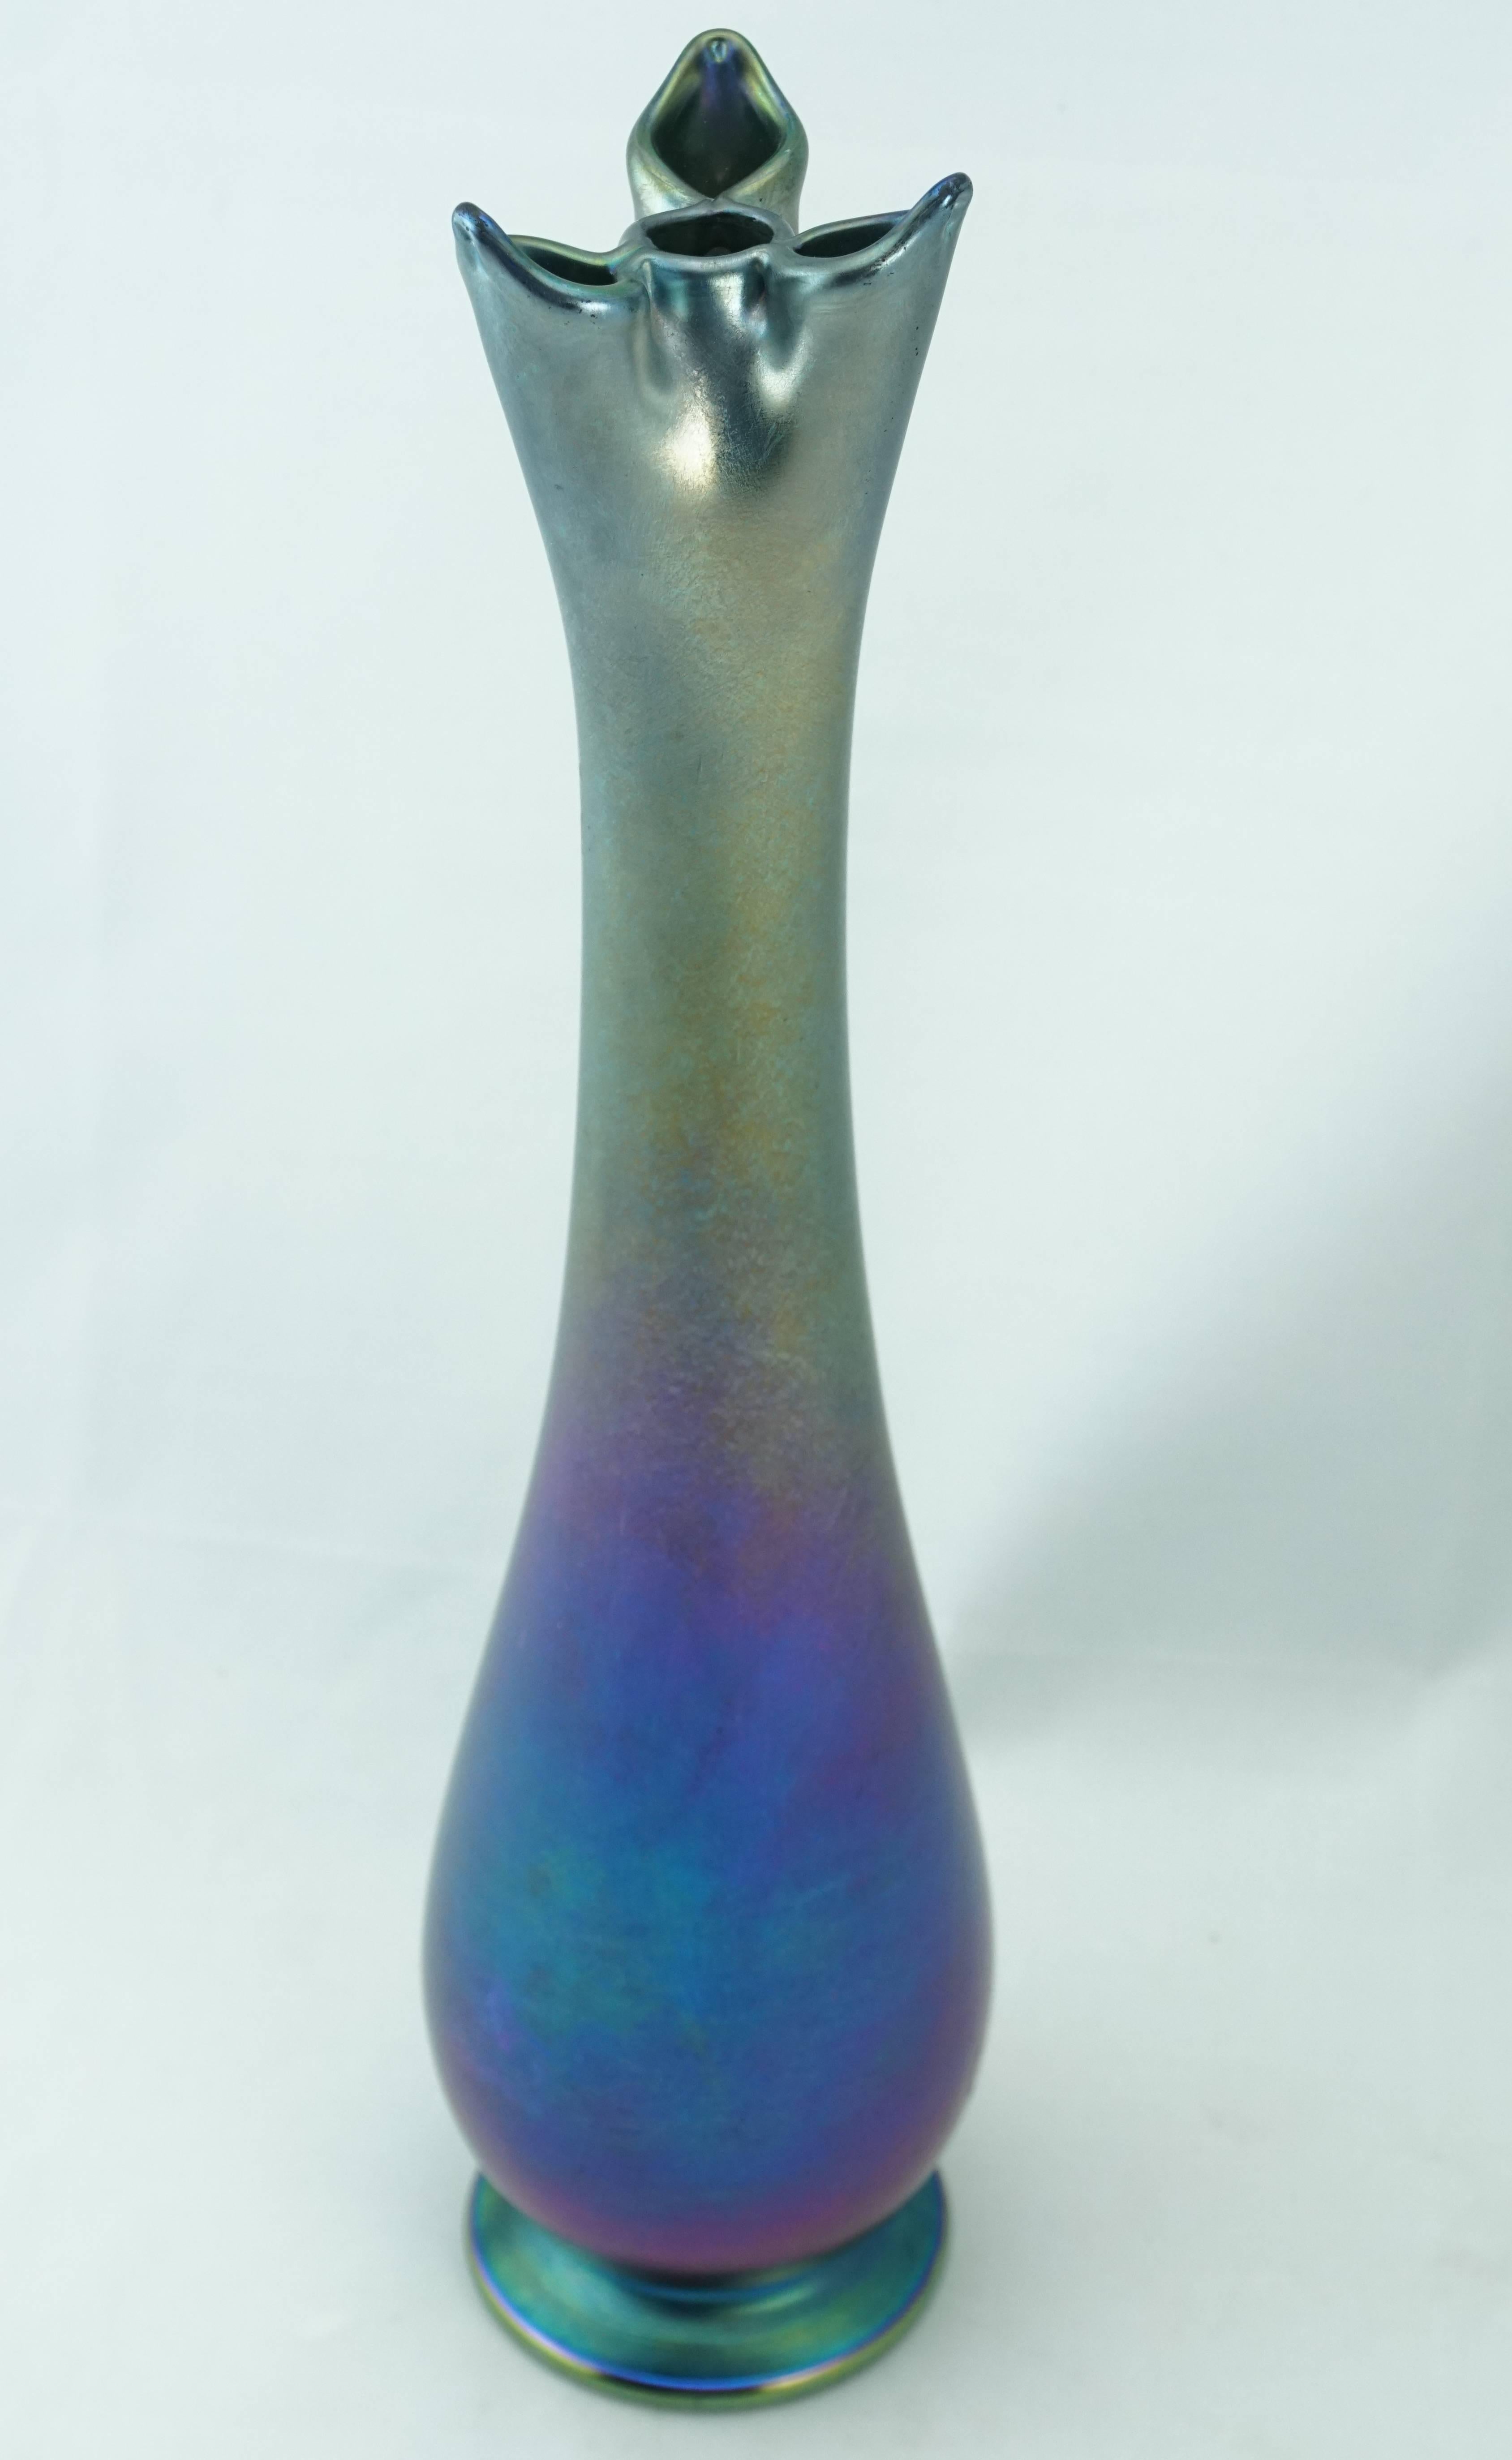 Louis Comfort Tiffany (American, 1848-1933), Turn of the century. A Tiffany Studios iridescent blue favrile art glass vase of elongated baluster form with folded glass at mouth forming four stem Chambers, the three outer Chambers with pointed edges,